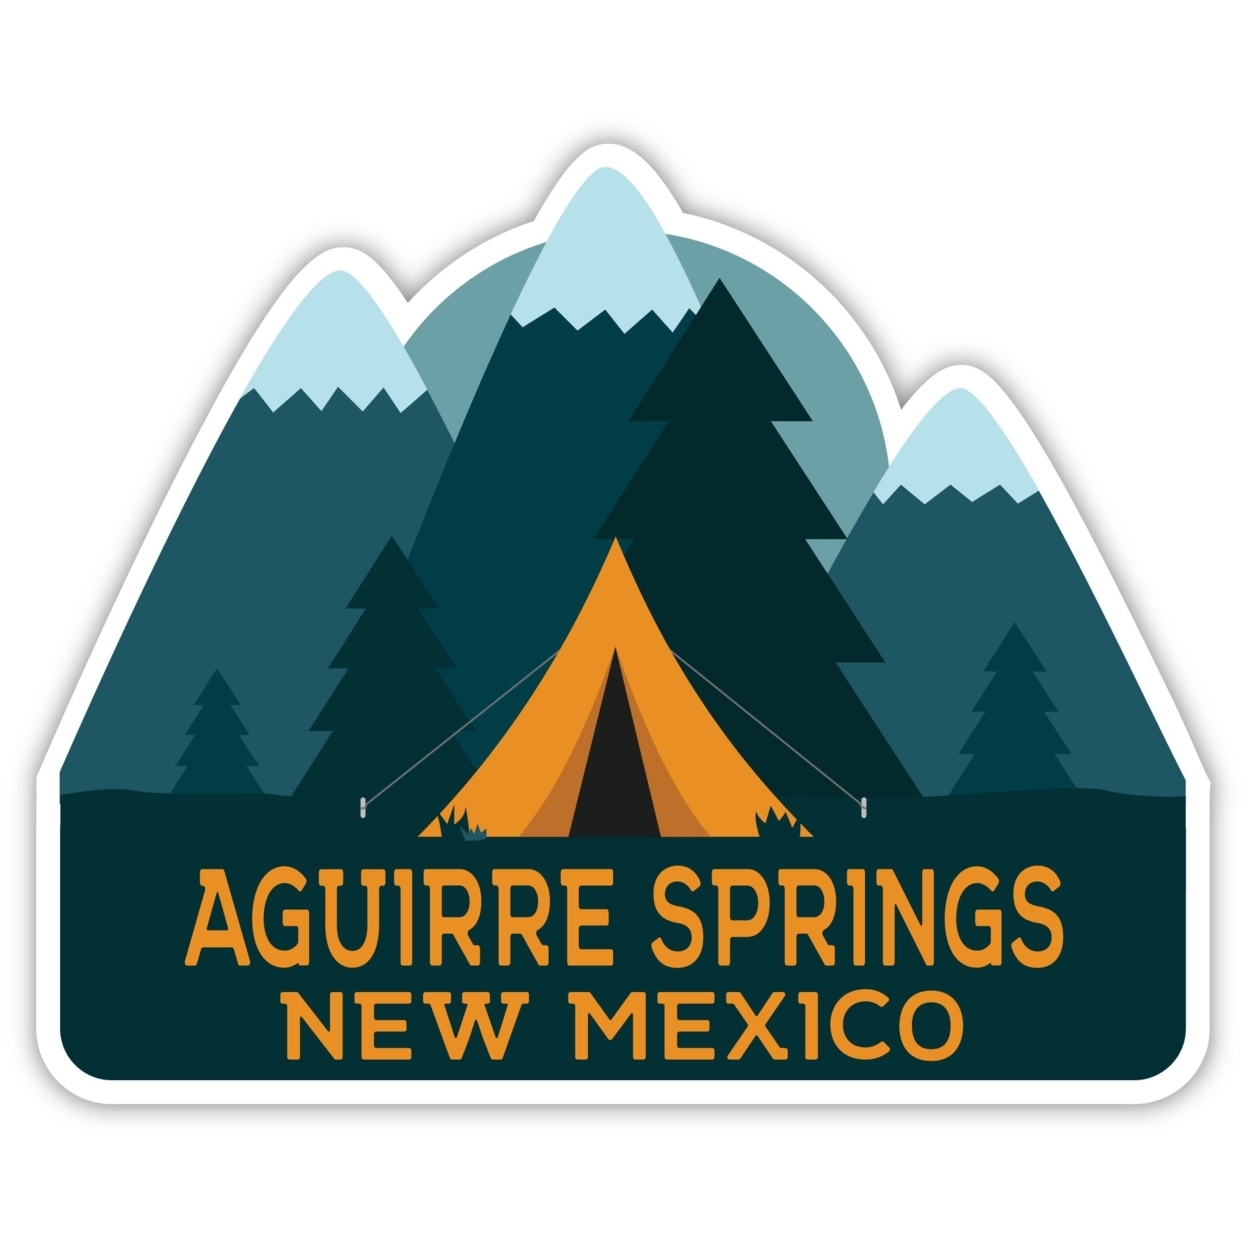 Aguirre Springs New Mexico Souvenir Decorative Stickers (Choose Theme And Size) - Single Unit, 4-Inch, Tent